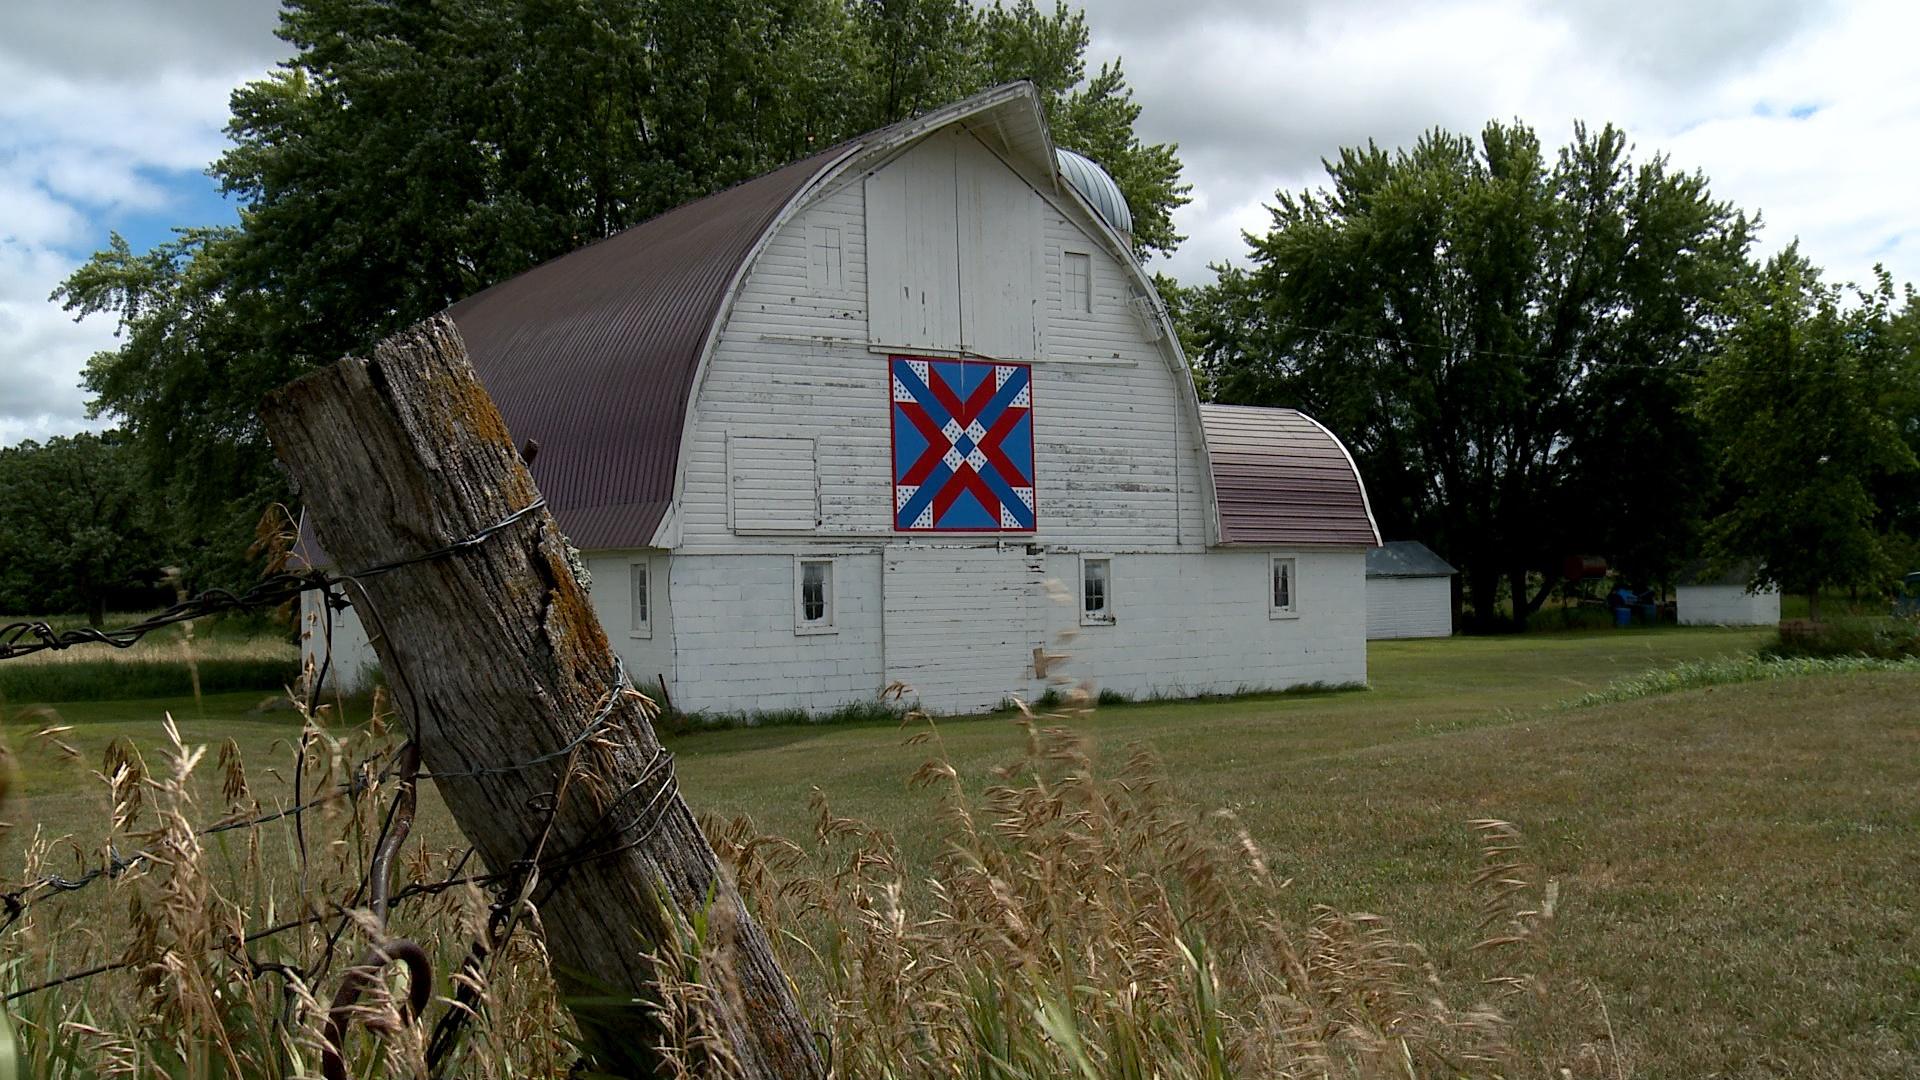 The Central Minnesota Barn Quilt Trail